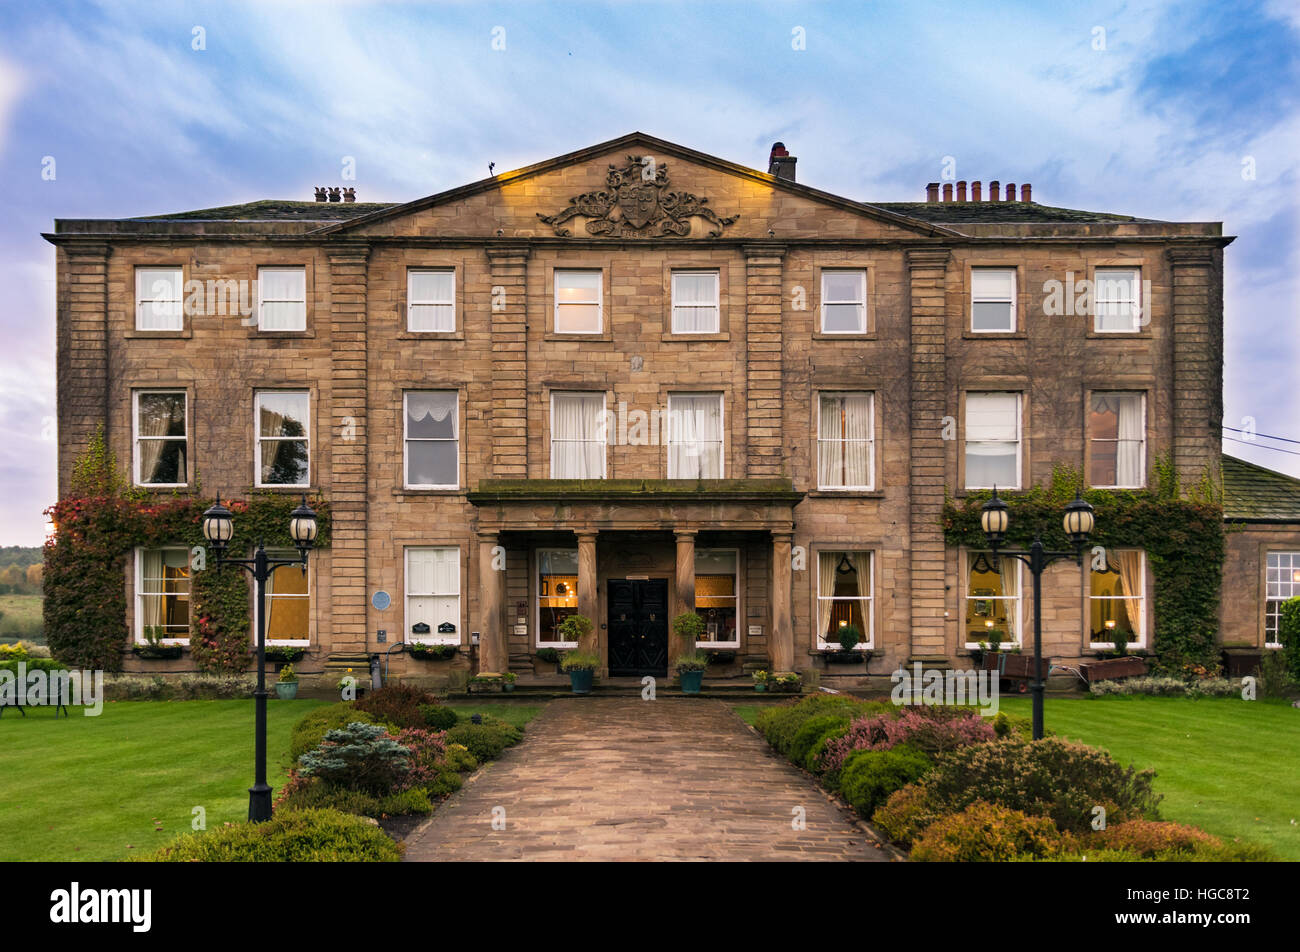 Wakefield, United Kingdom - October 20, 2016: Walton Hall, a 4 star hotel in a scenic setting of rolling parkland with its own lake, a backdrop of anc Stock Photo